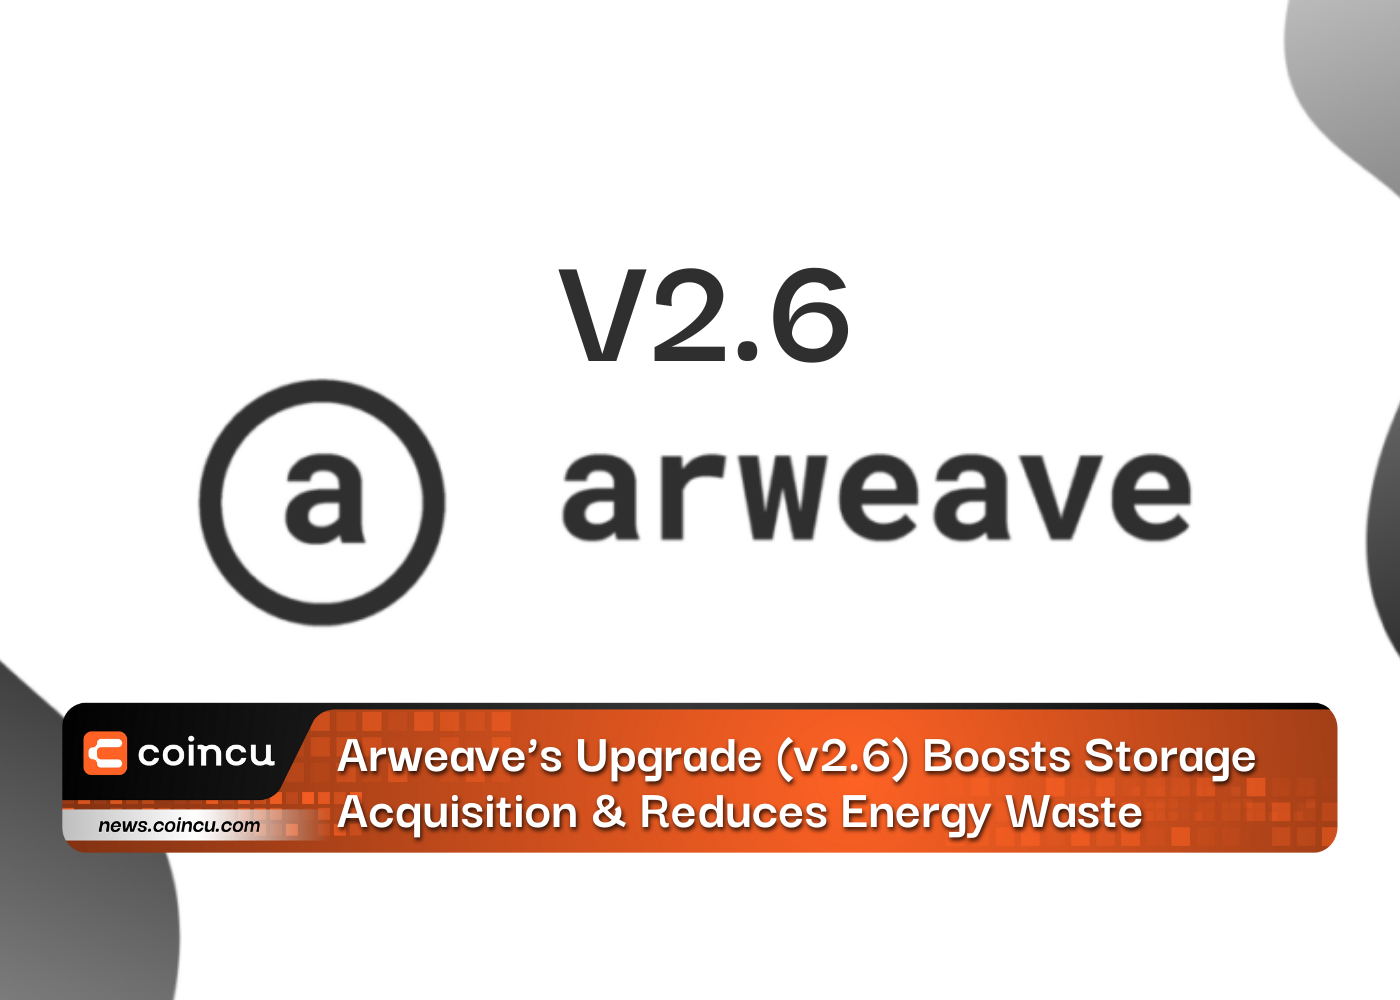 Arweave’s Upgrade (v2.6) Boosts Storage Acquisition & Reduces Energy Waste